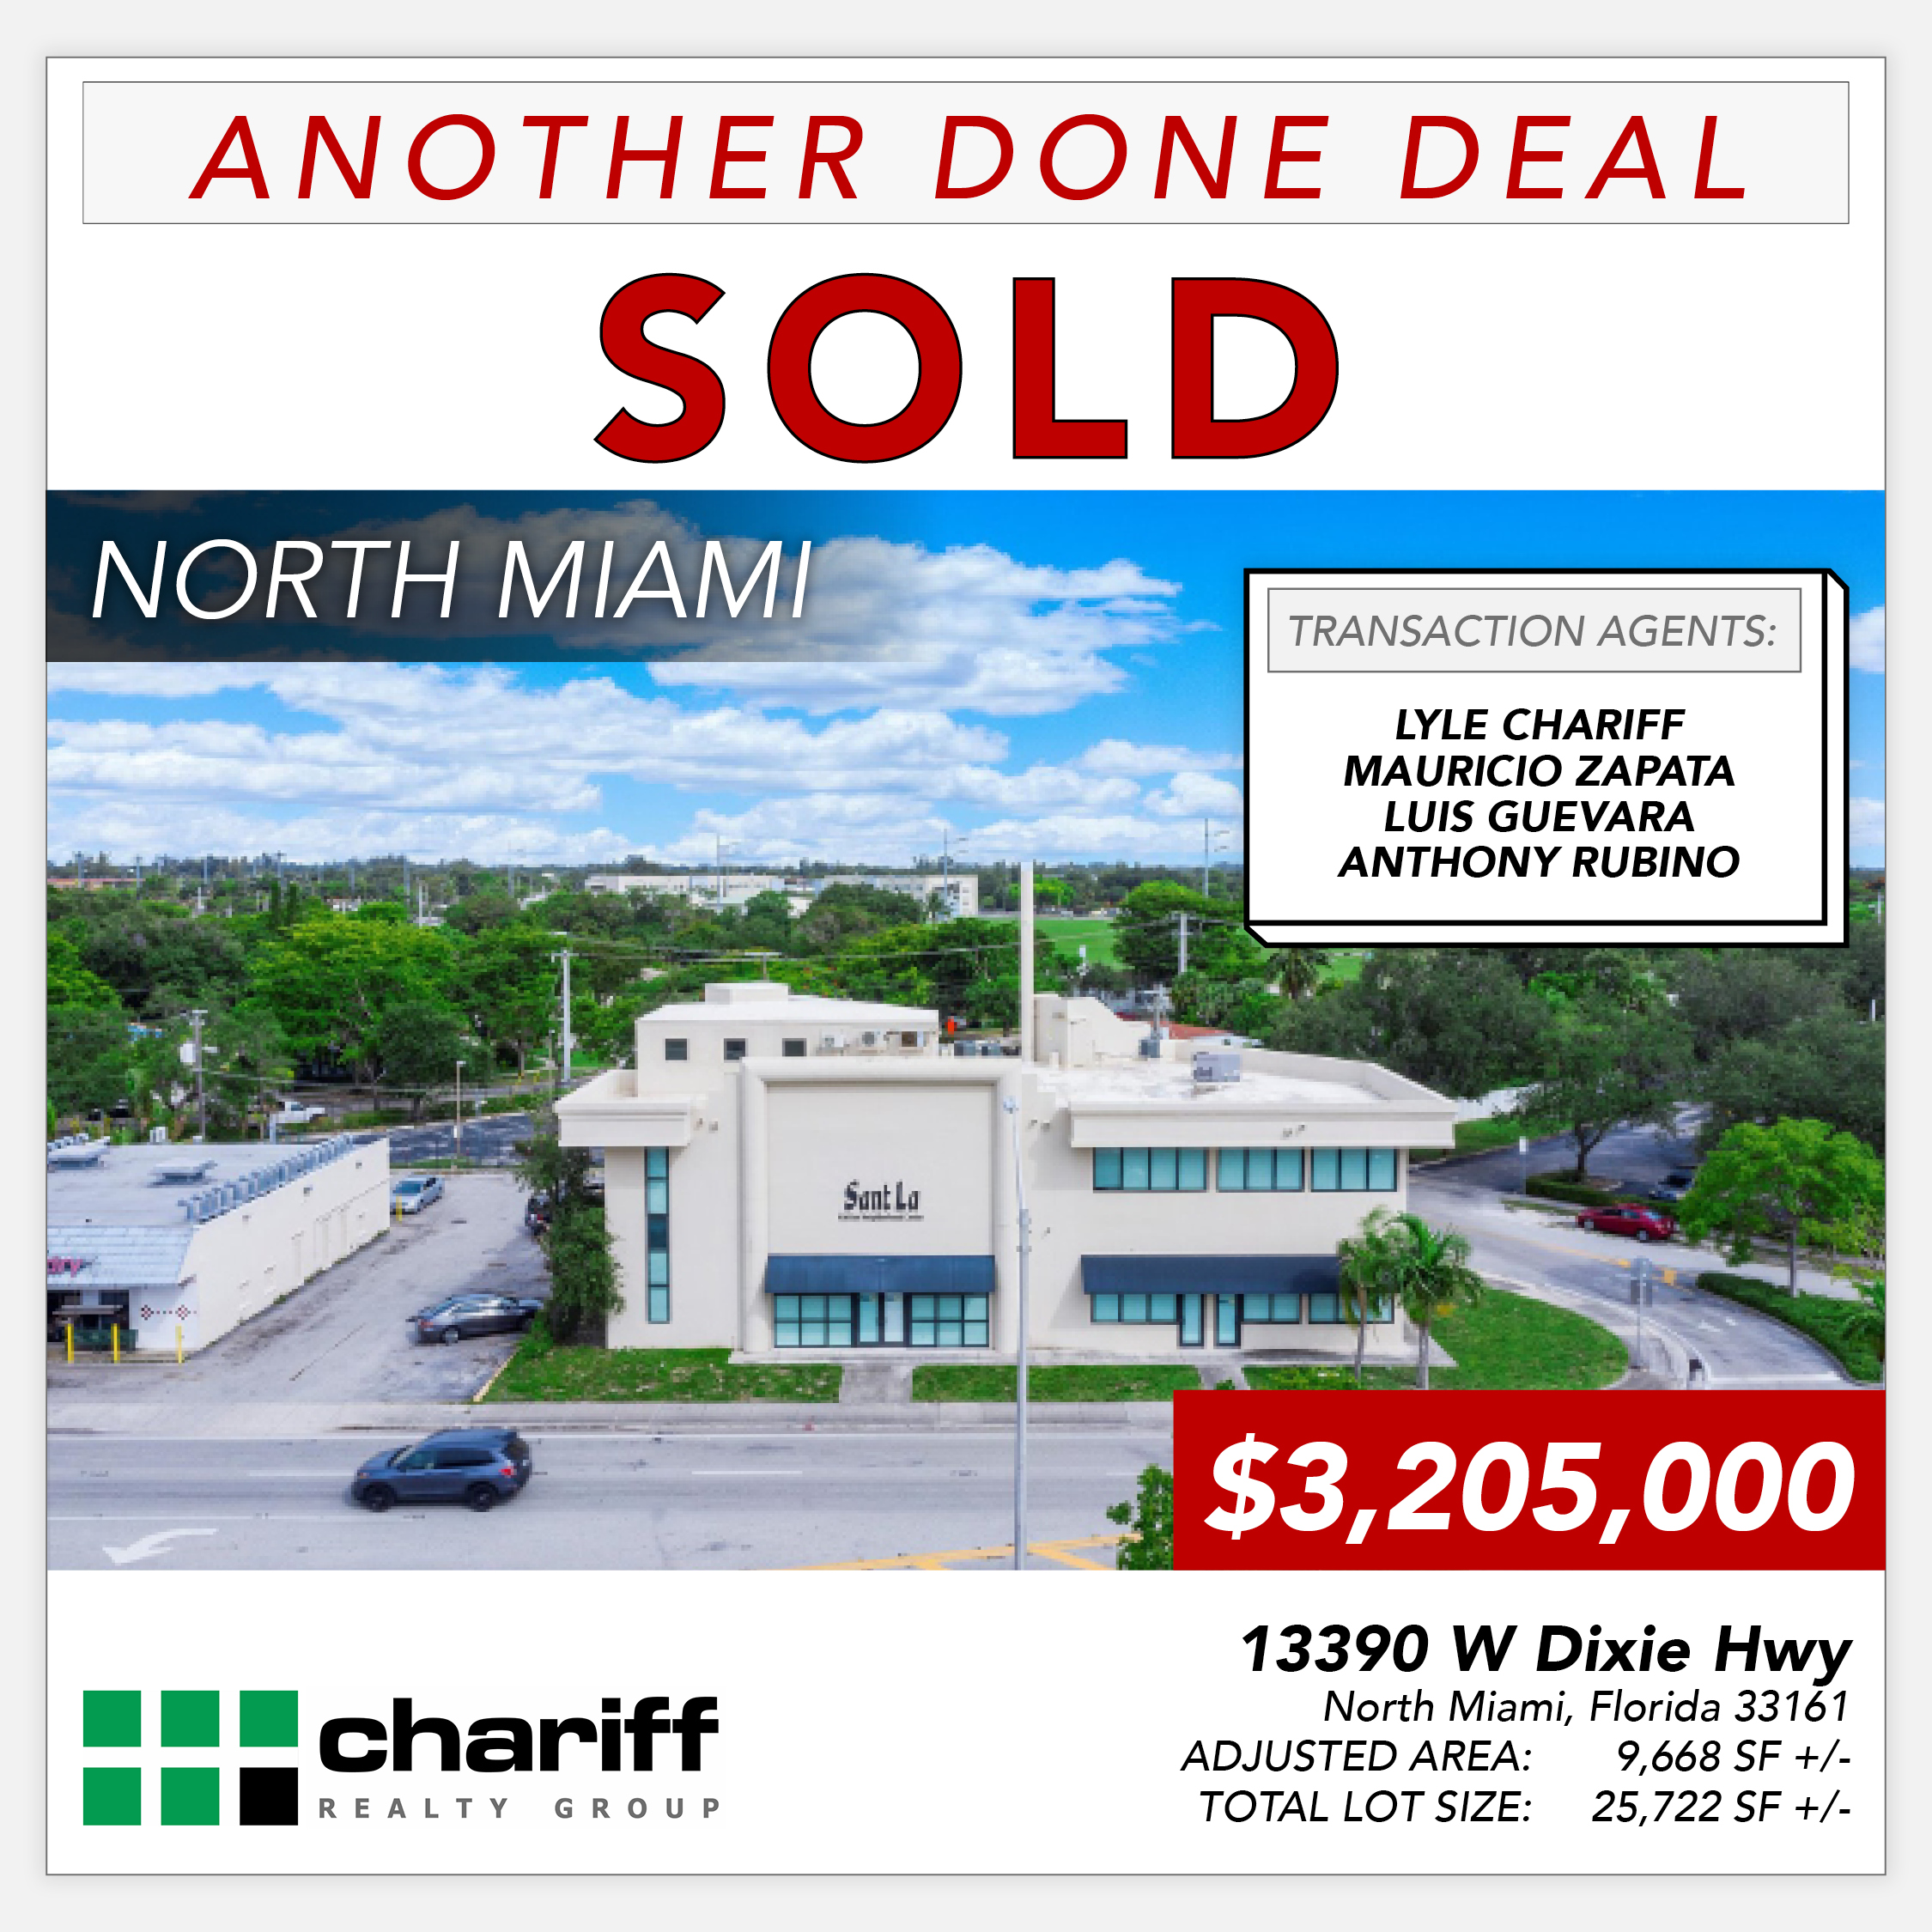 13390 W Dixie Hwy- Another Done Deal-Sold-North Miami - Miami-Florida -33161 -Chariff Realty Group